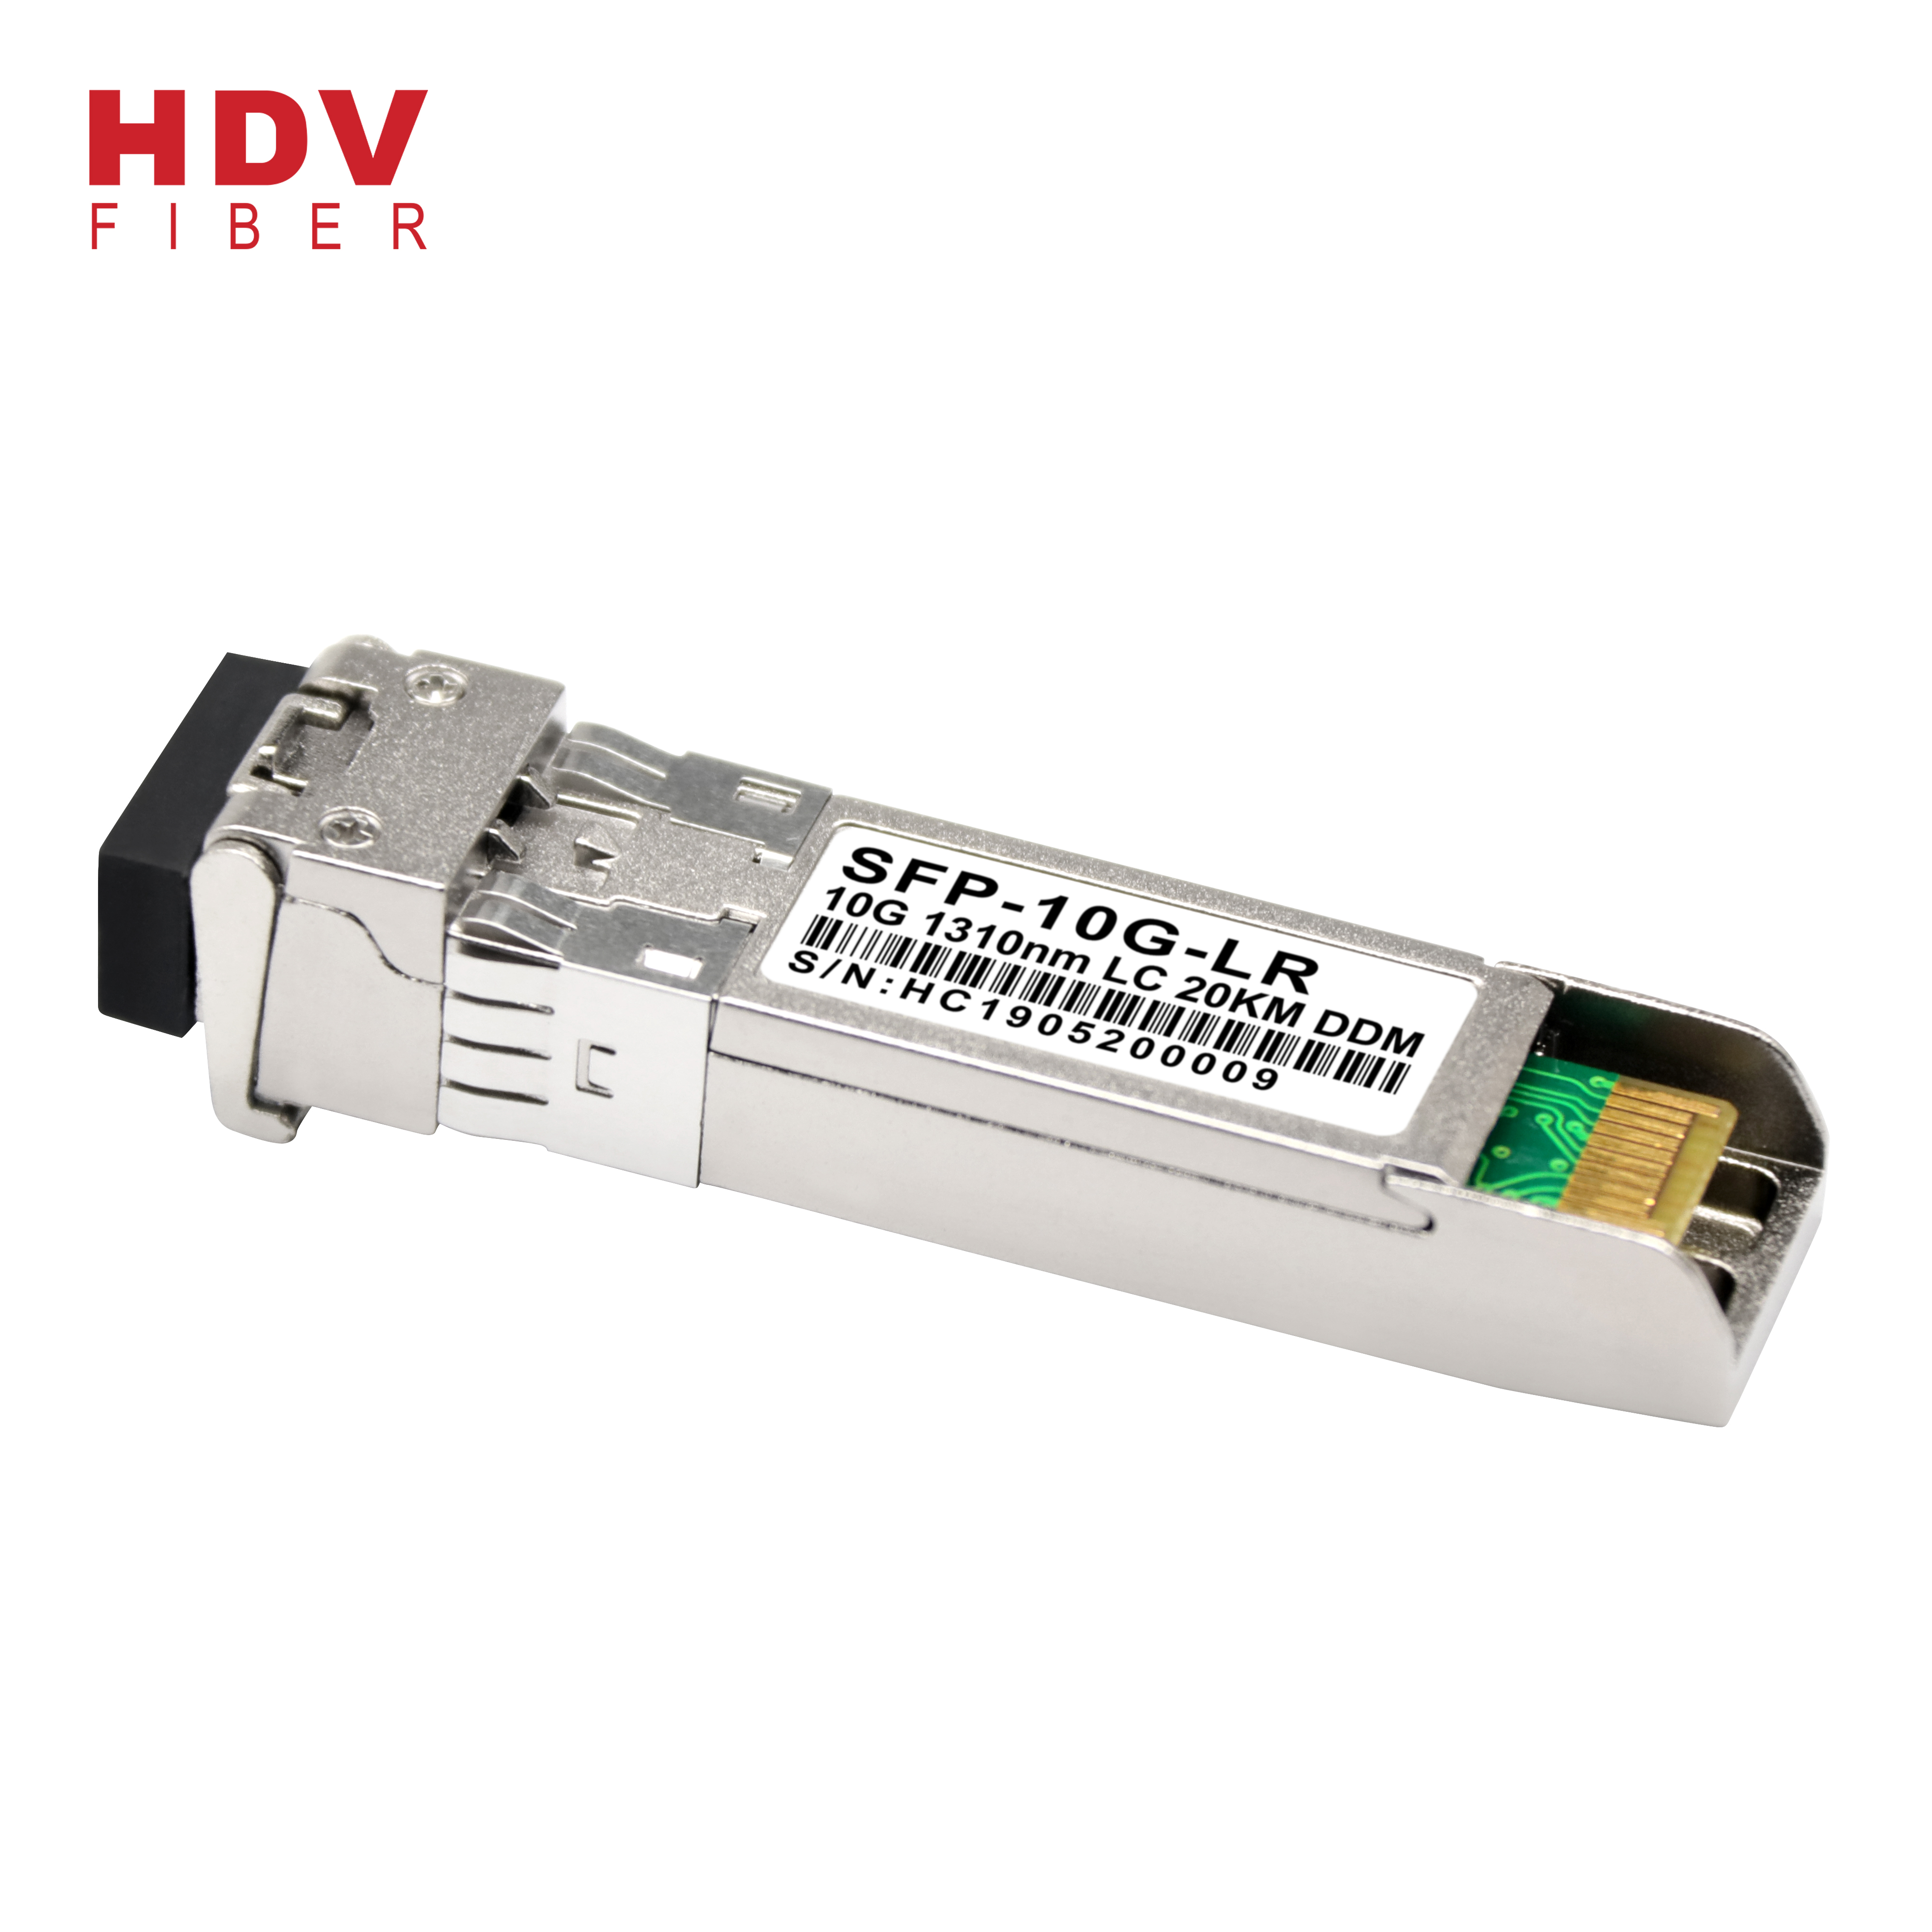 Chinese Professional 1000base Lx Sfp Compatibility - 10G 1310nm 20KM LC connector dual fiber optic SFP Transceiver SFP+ module – HDV